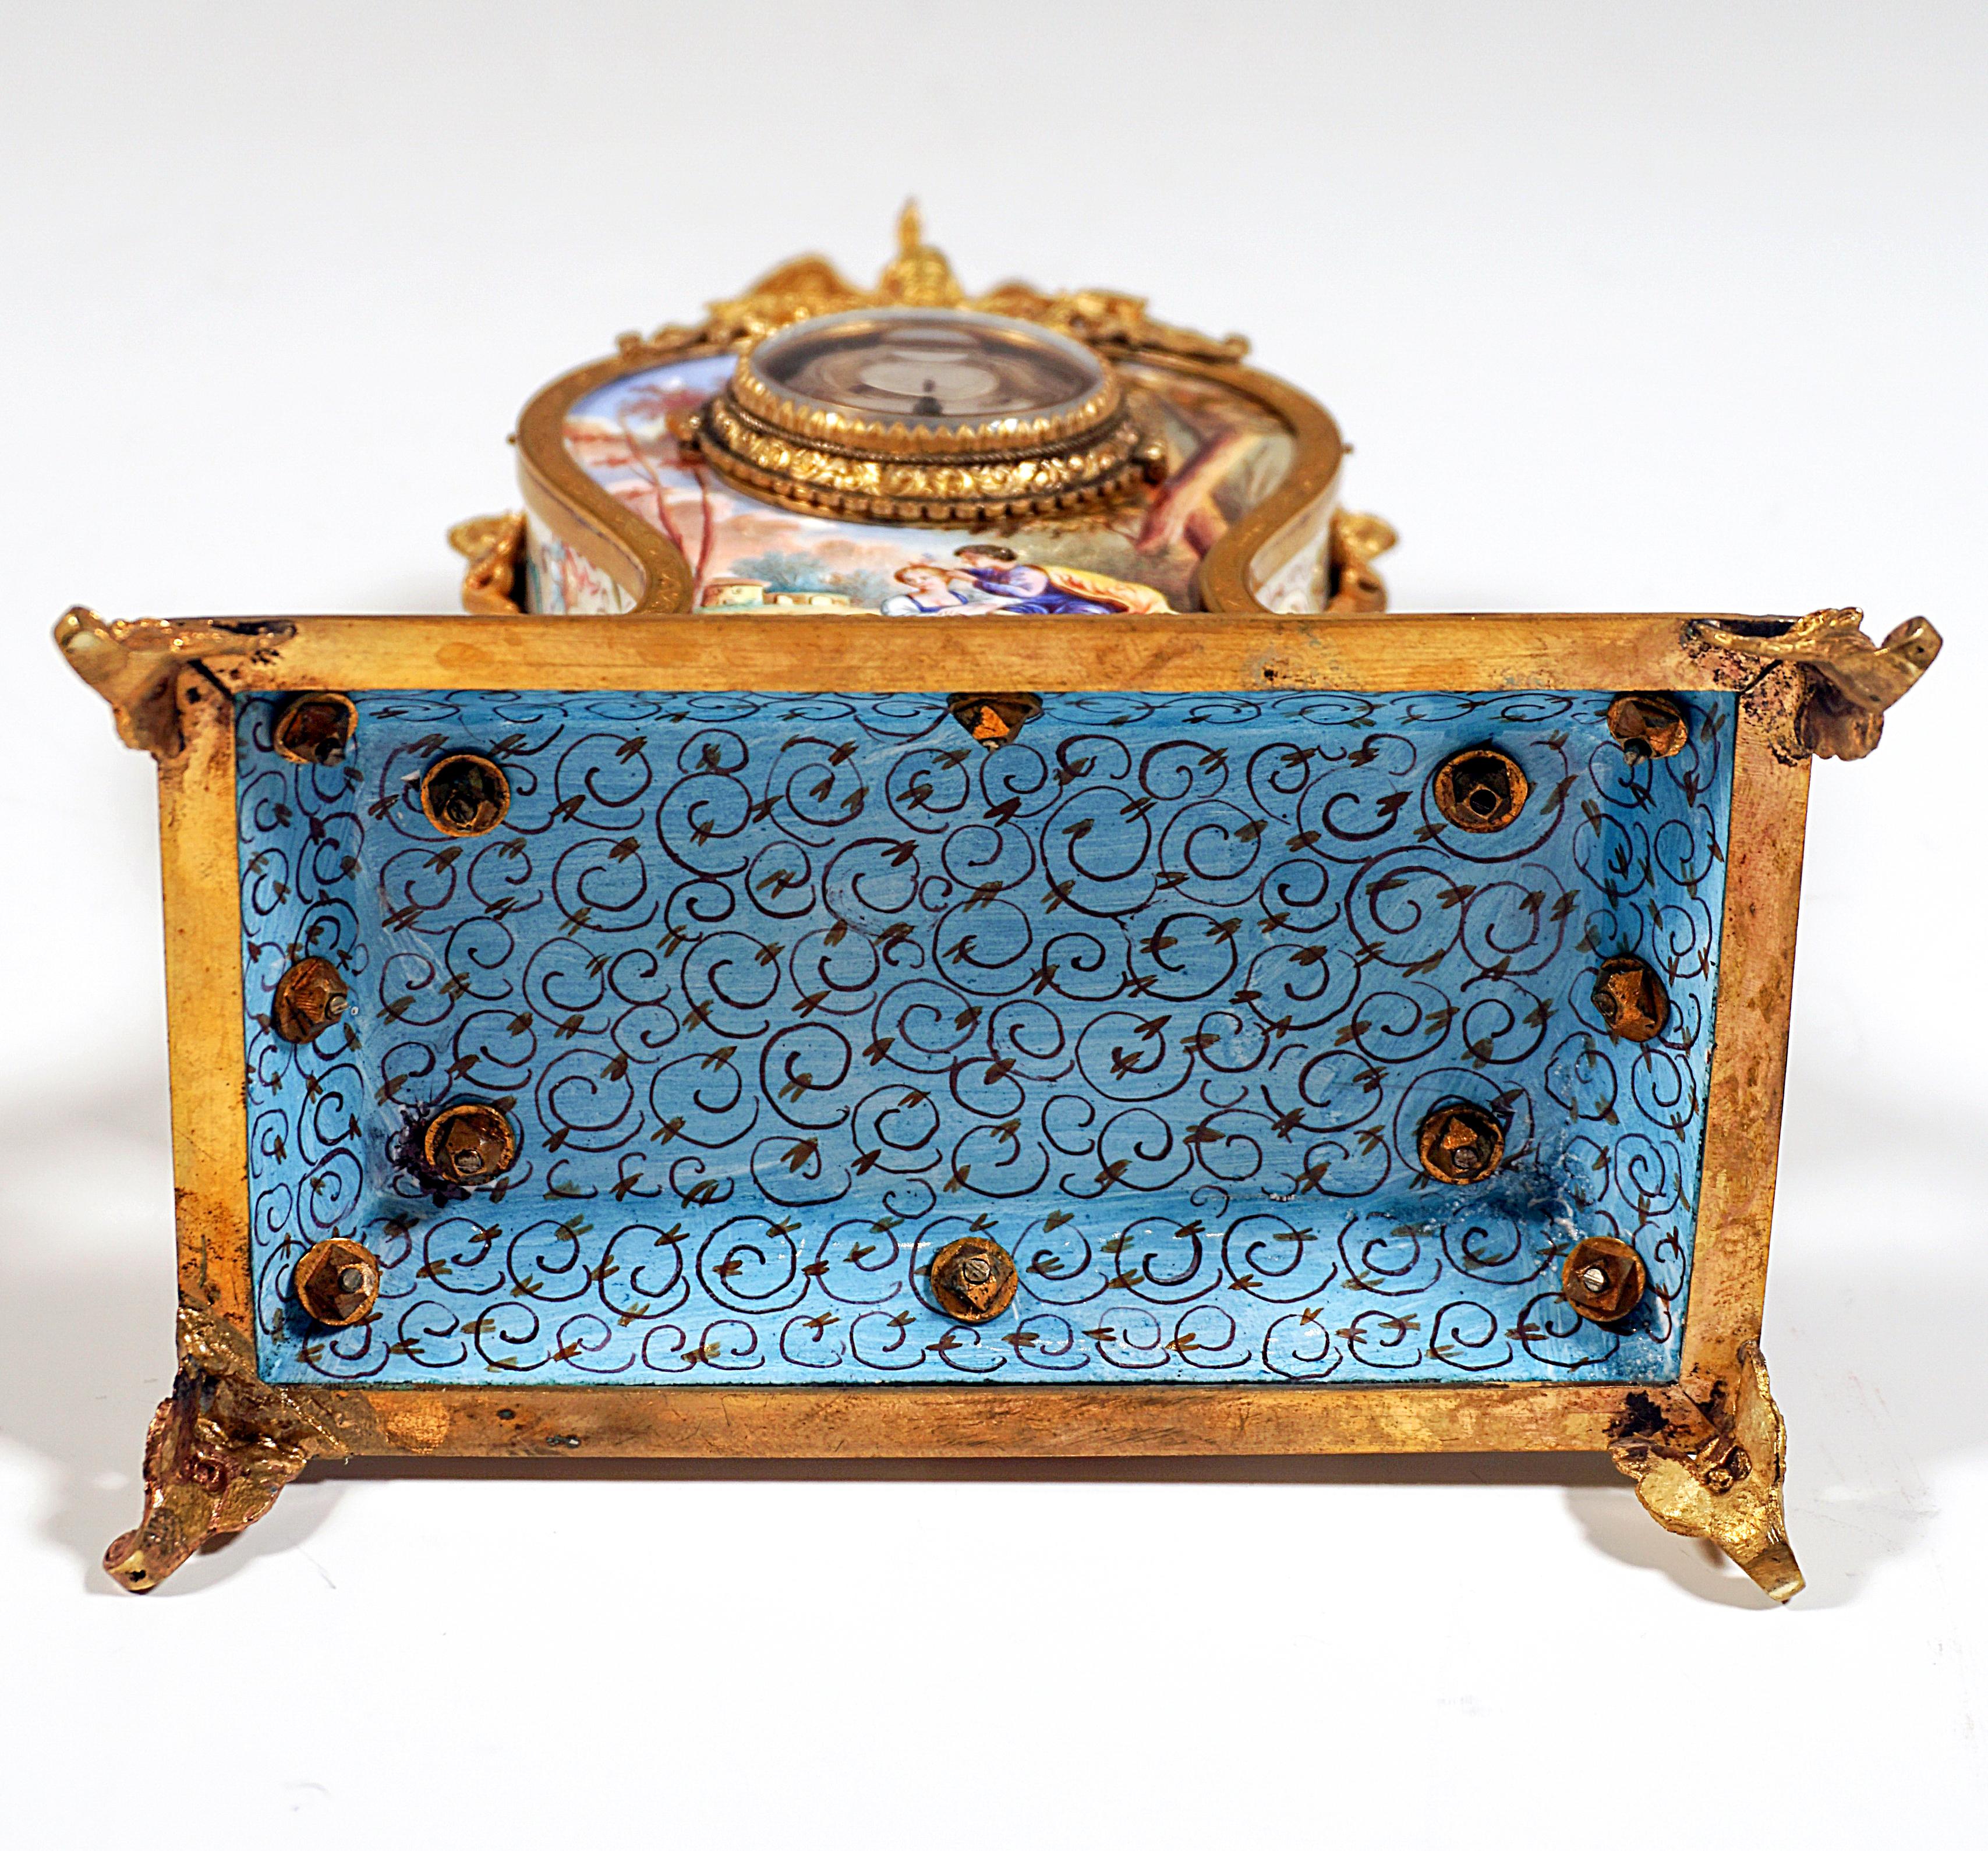  Viennese Gilt Silver & Enamel Table Clock With Gallant Scenes Painting, Ca 1880 5